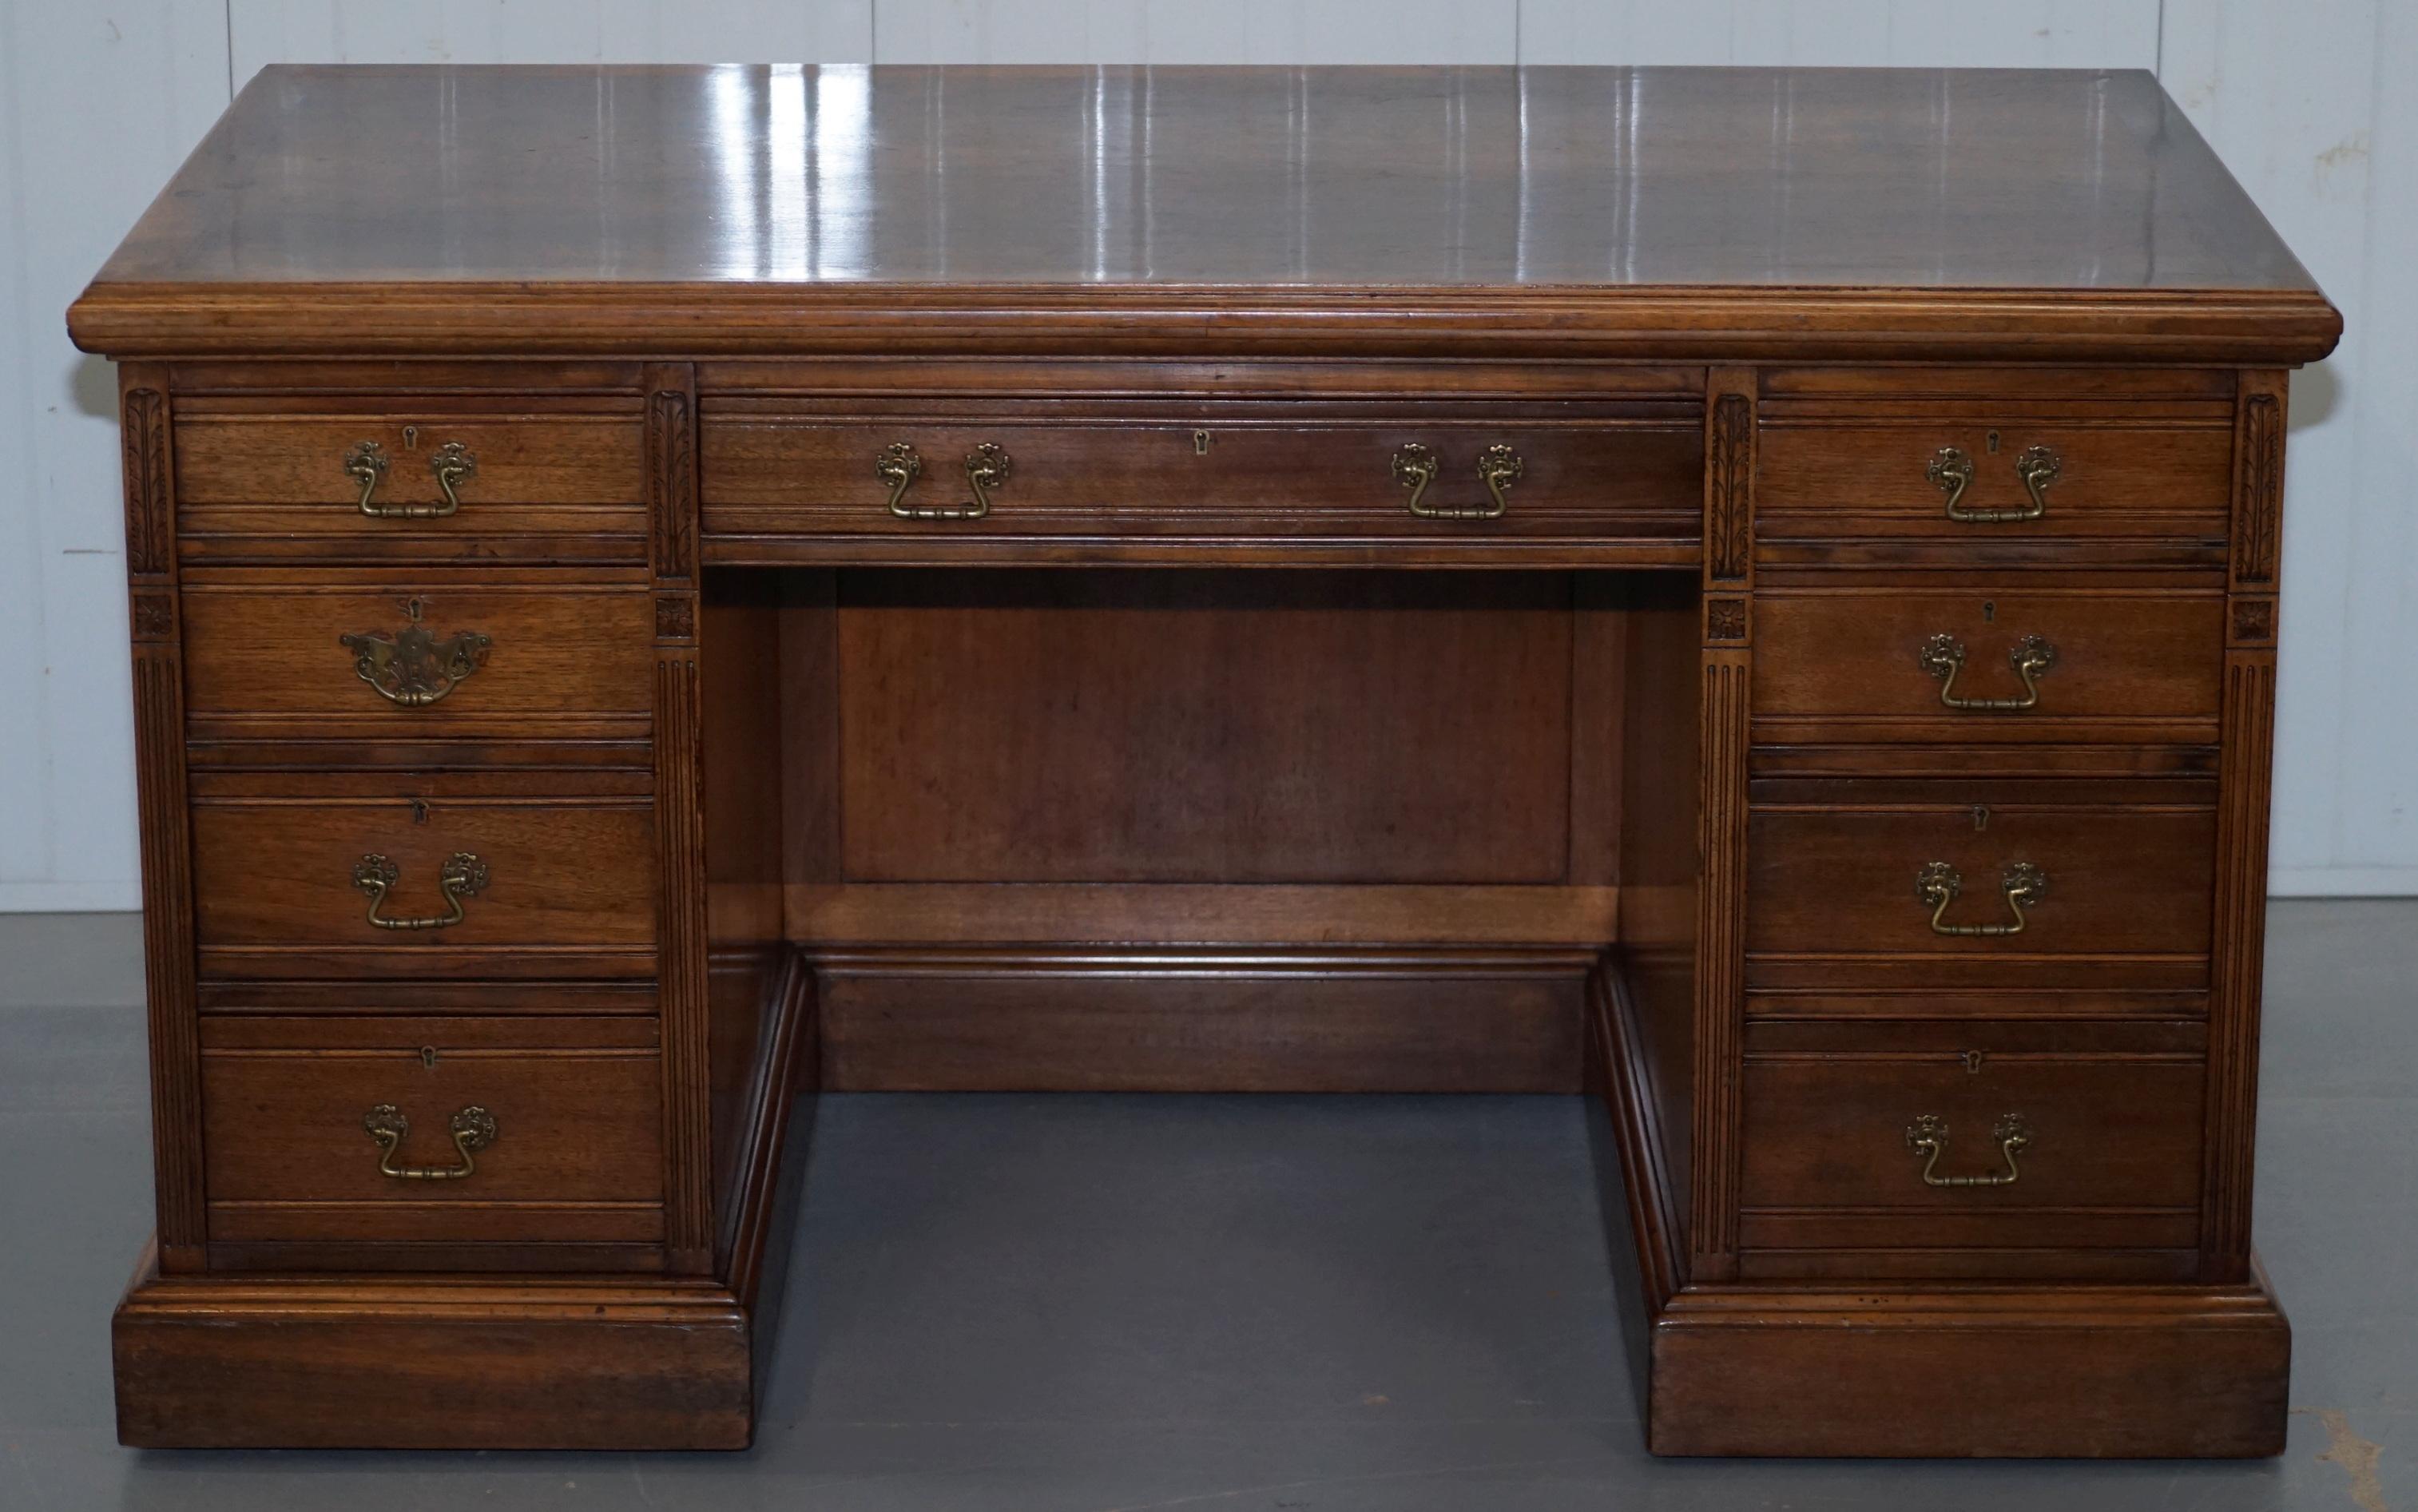 We are delighted to offer for sale this period Victorian circa 1880 Hobbs & Co solid Walnut desk with panelled back 

This desk is very rare, its solid walnut which is a luxury high-end timber, it has the enclosed panelled back which again is a